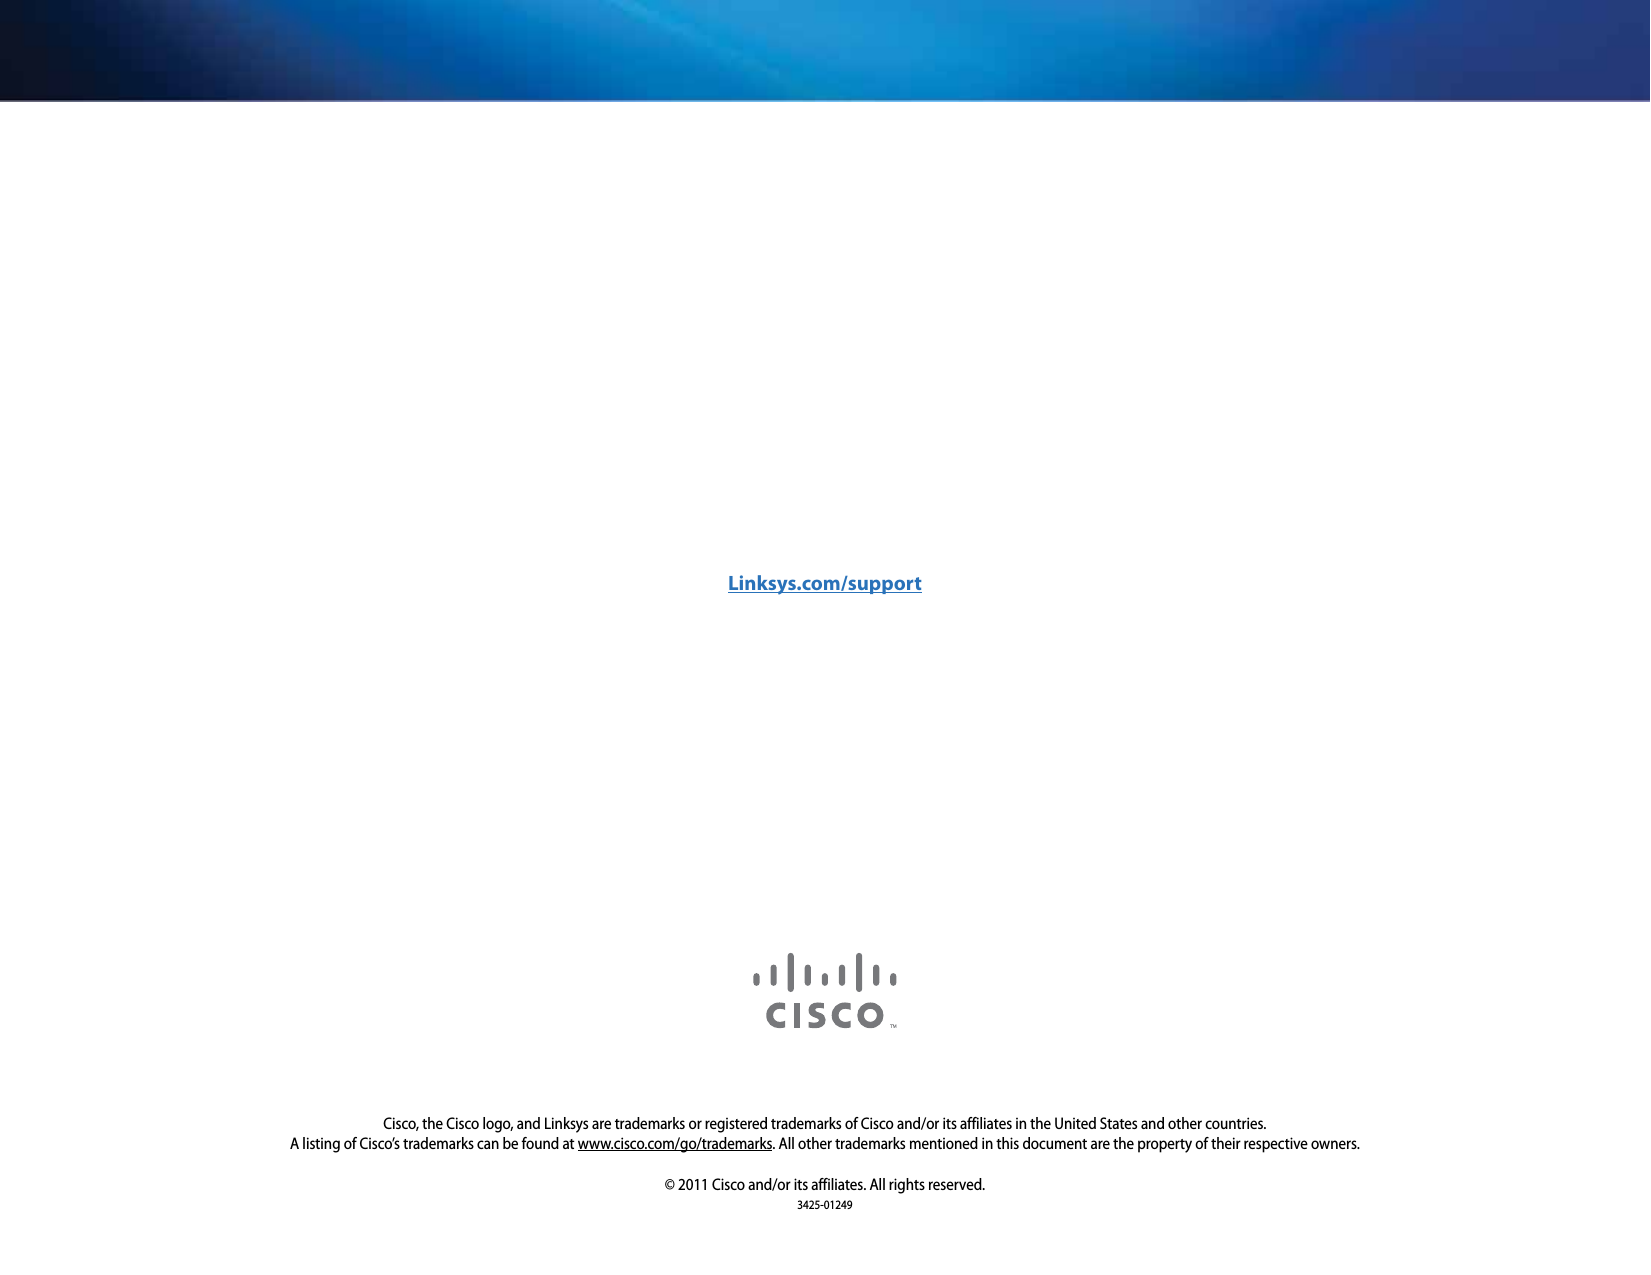 3425-01249Cisco, the Cisco logo, and Linksys are trademarks or registered trademarks of Cisco and/or its affiliates in the United States and other countries. A listing of Cisco’s trademarks can be found at www.cisco.com/go/trademarks. All other trademarks mentioned in this document are the property of their respective owners.© 2011 Cisco and/or its affiliates. All rights reserved.Linksys.com/support